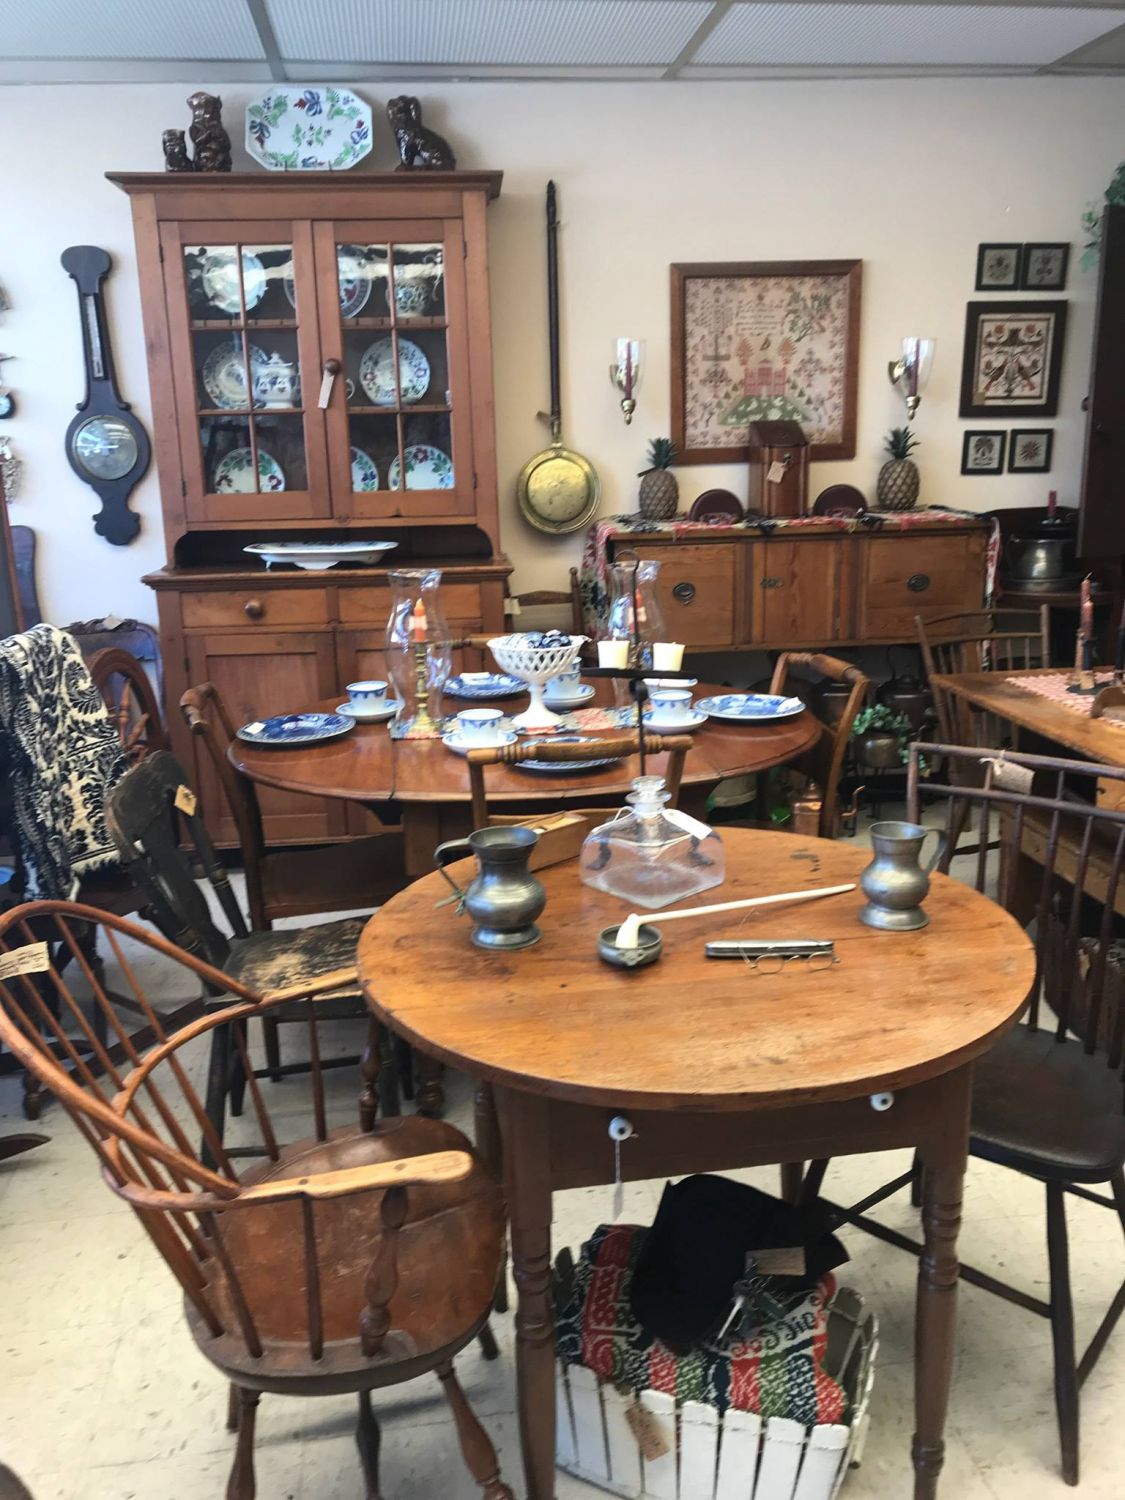 Ohio River Valley Antiques - Ravenswood, West Virginia 26164